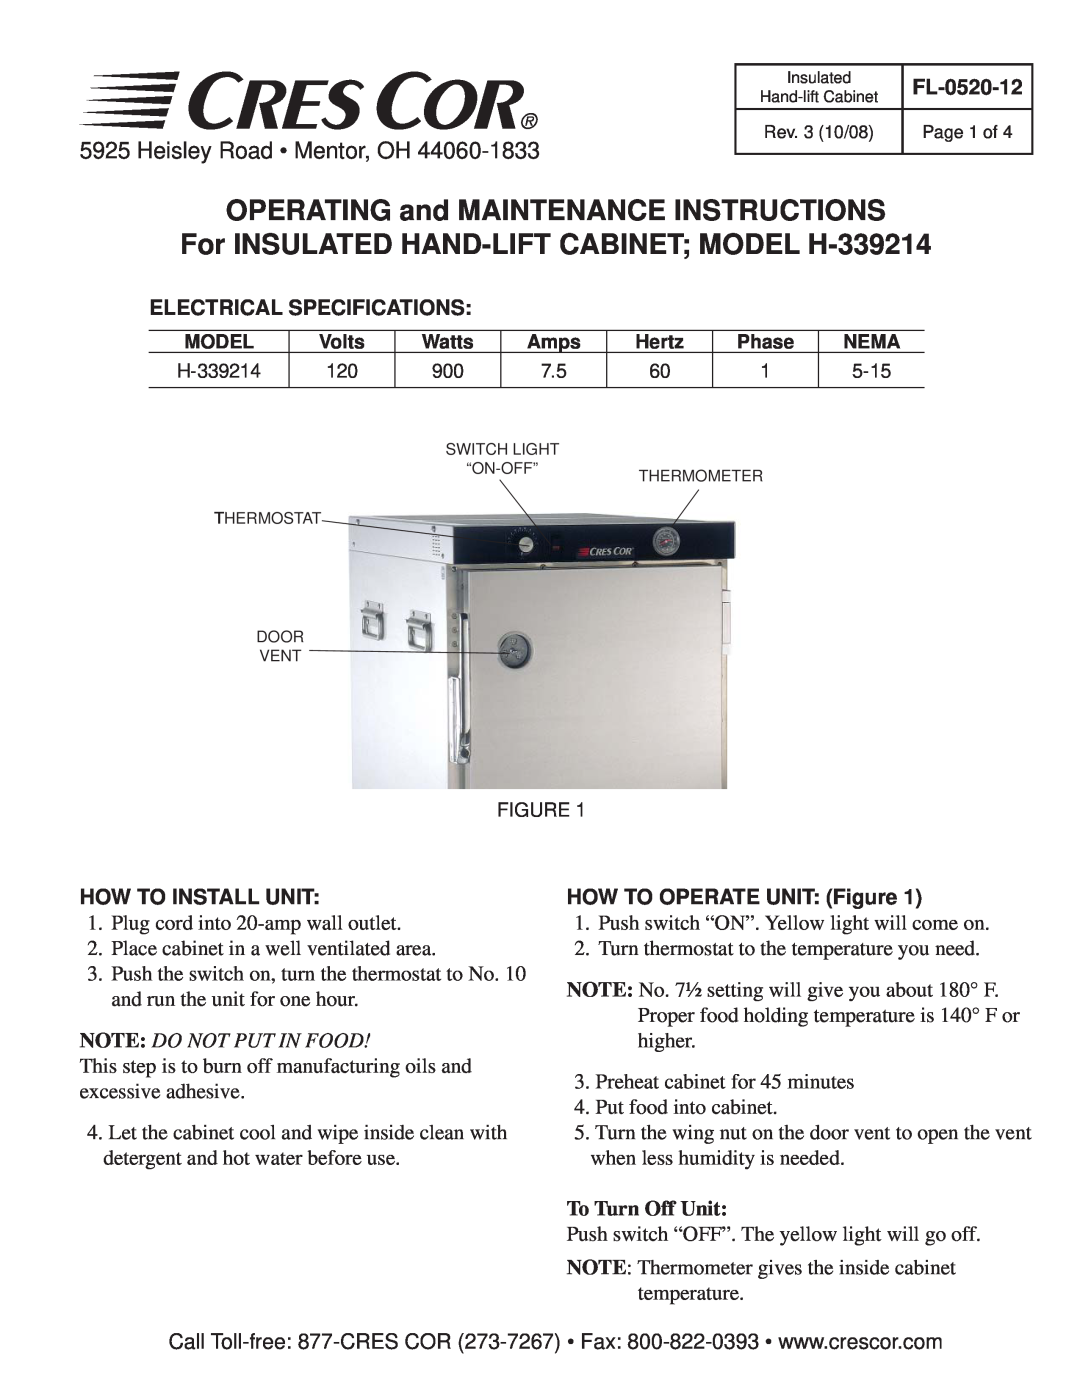 Cres Cor specifications OPERATING and MAINTENANCE INSTRUCTIONS, For INSULATED HAND-LIFT CABINET MODEL H-339214 